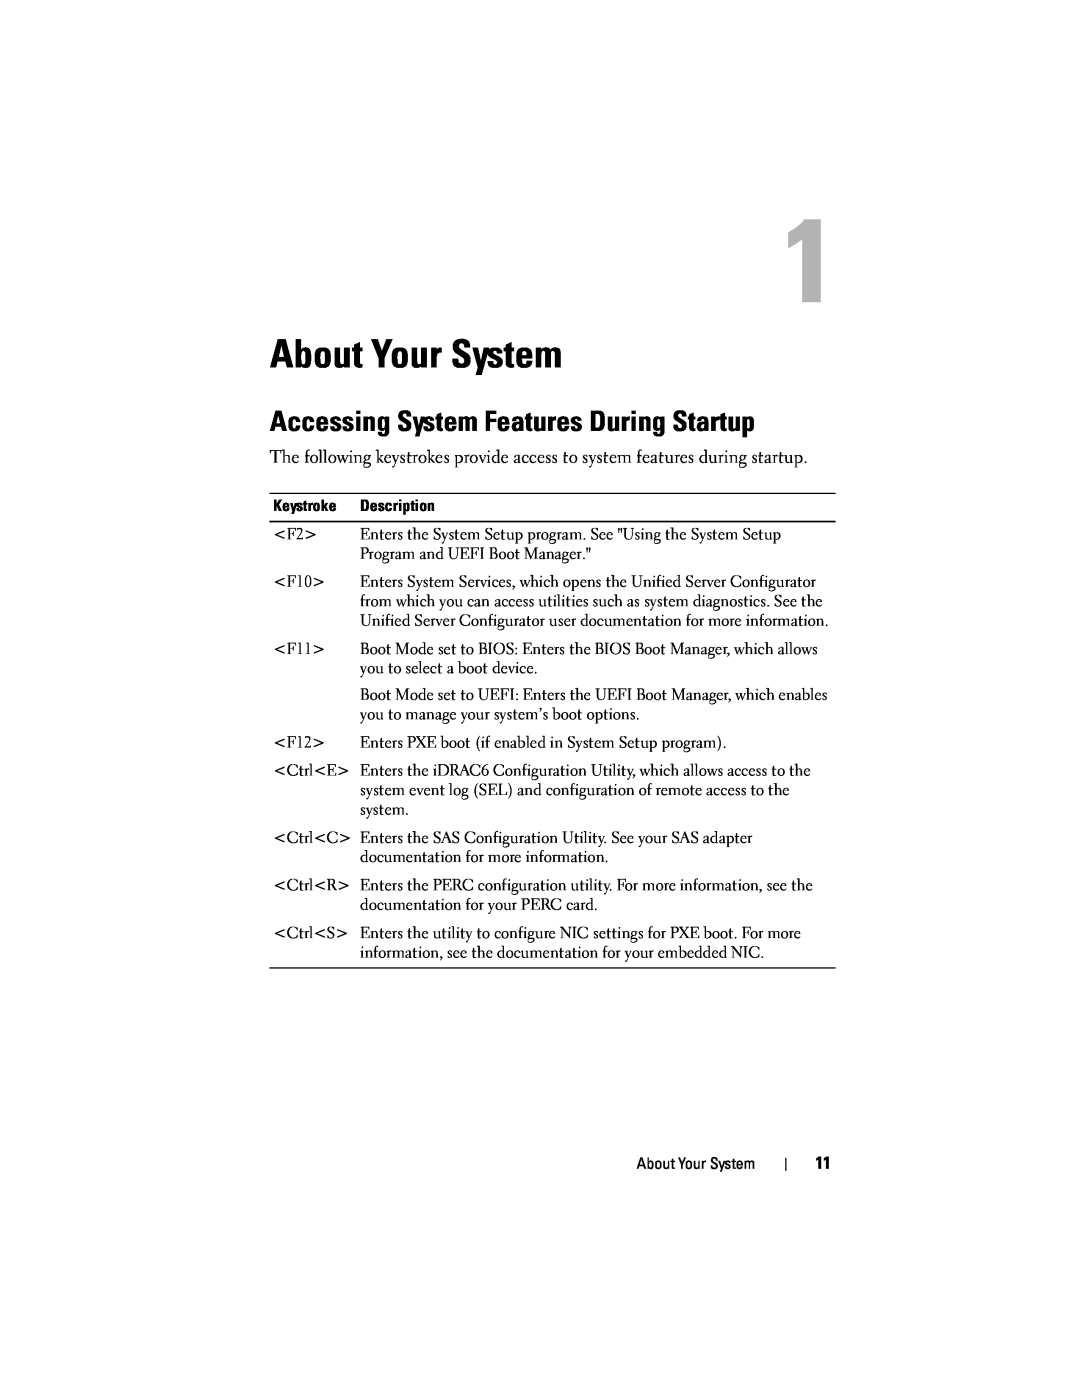 Dell R610 owner manual About Your System, Accessing System Features During Startup 